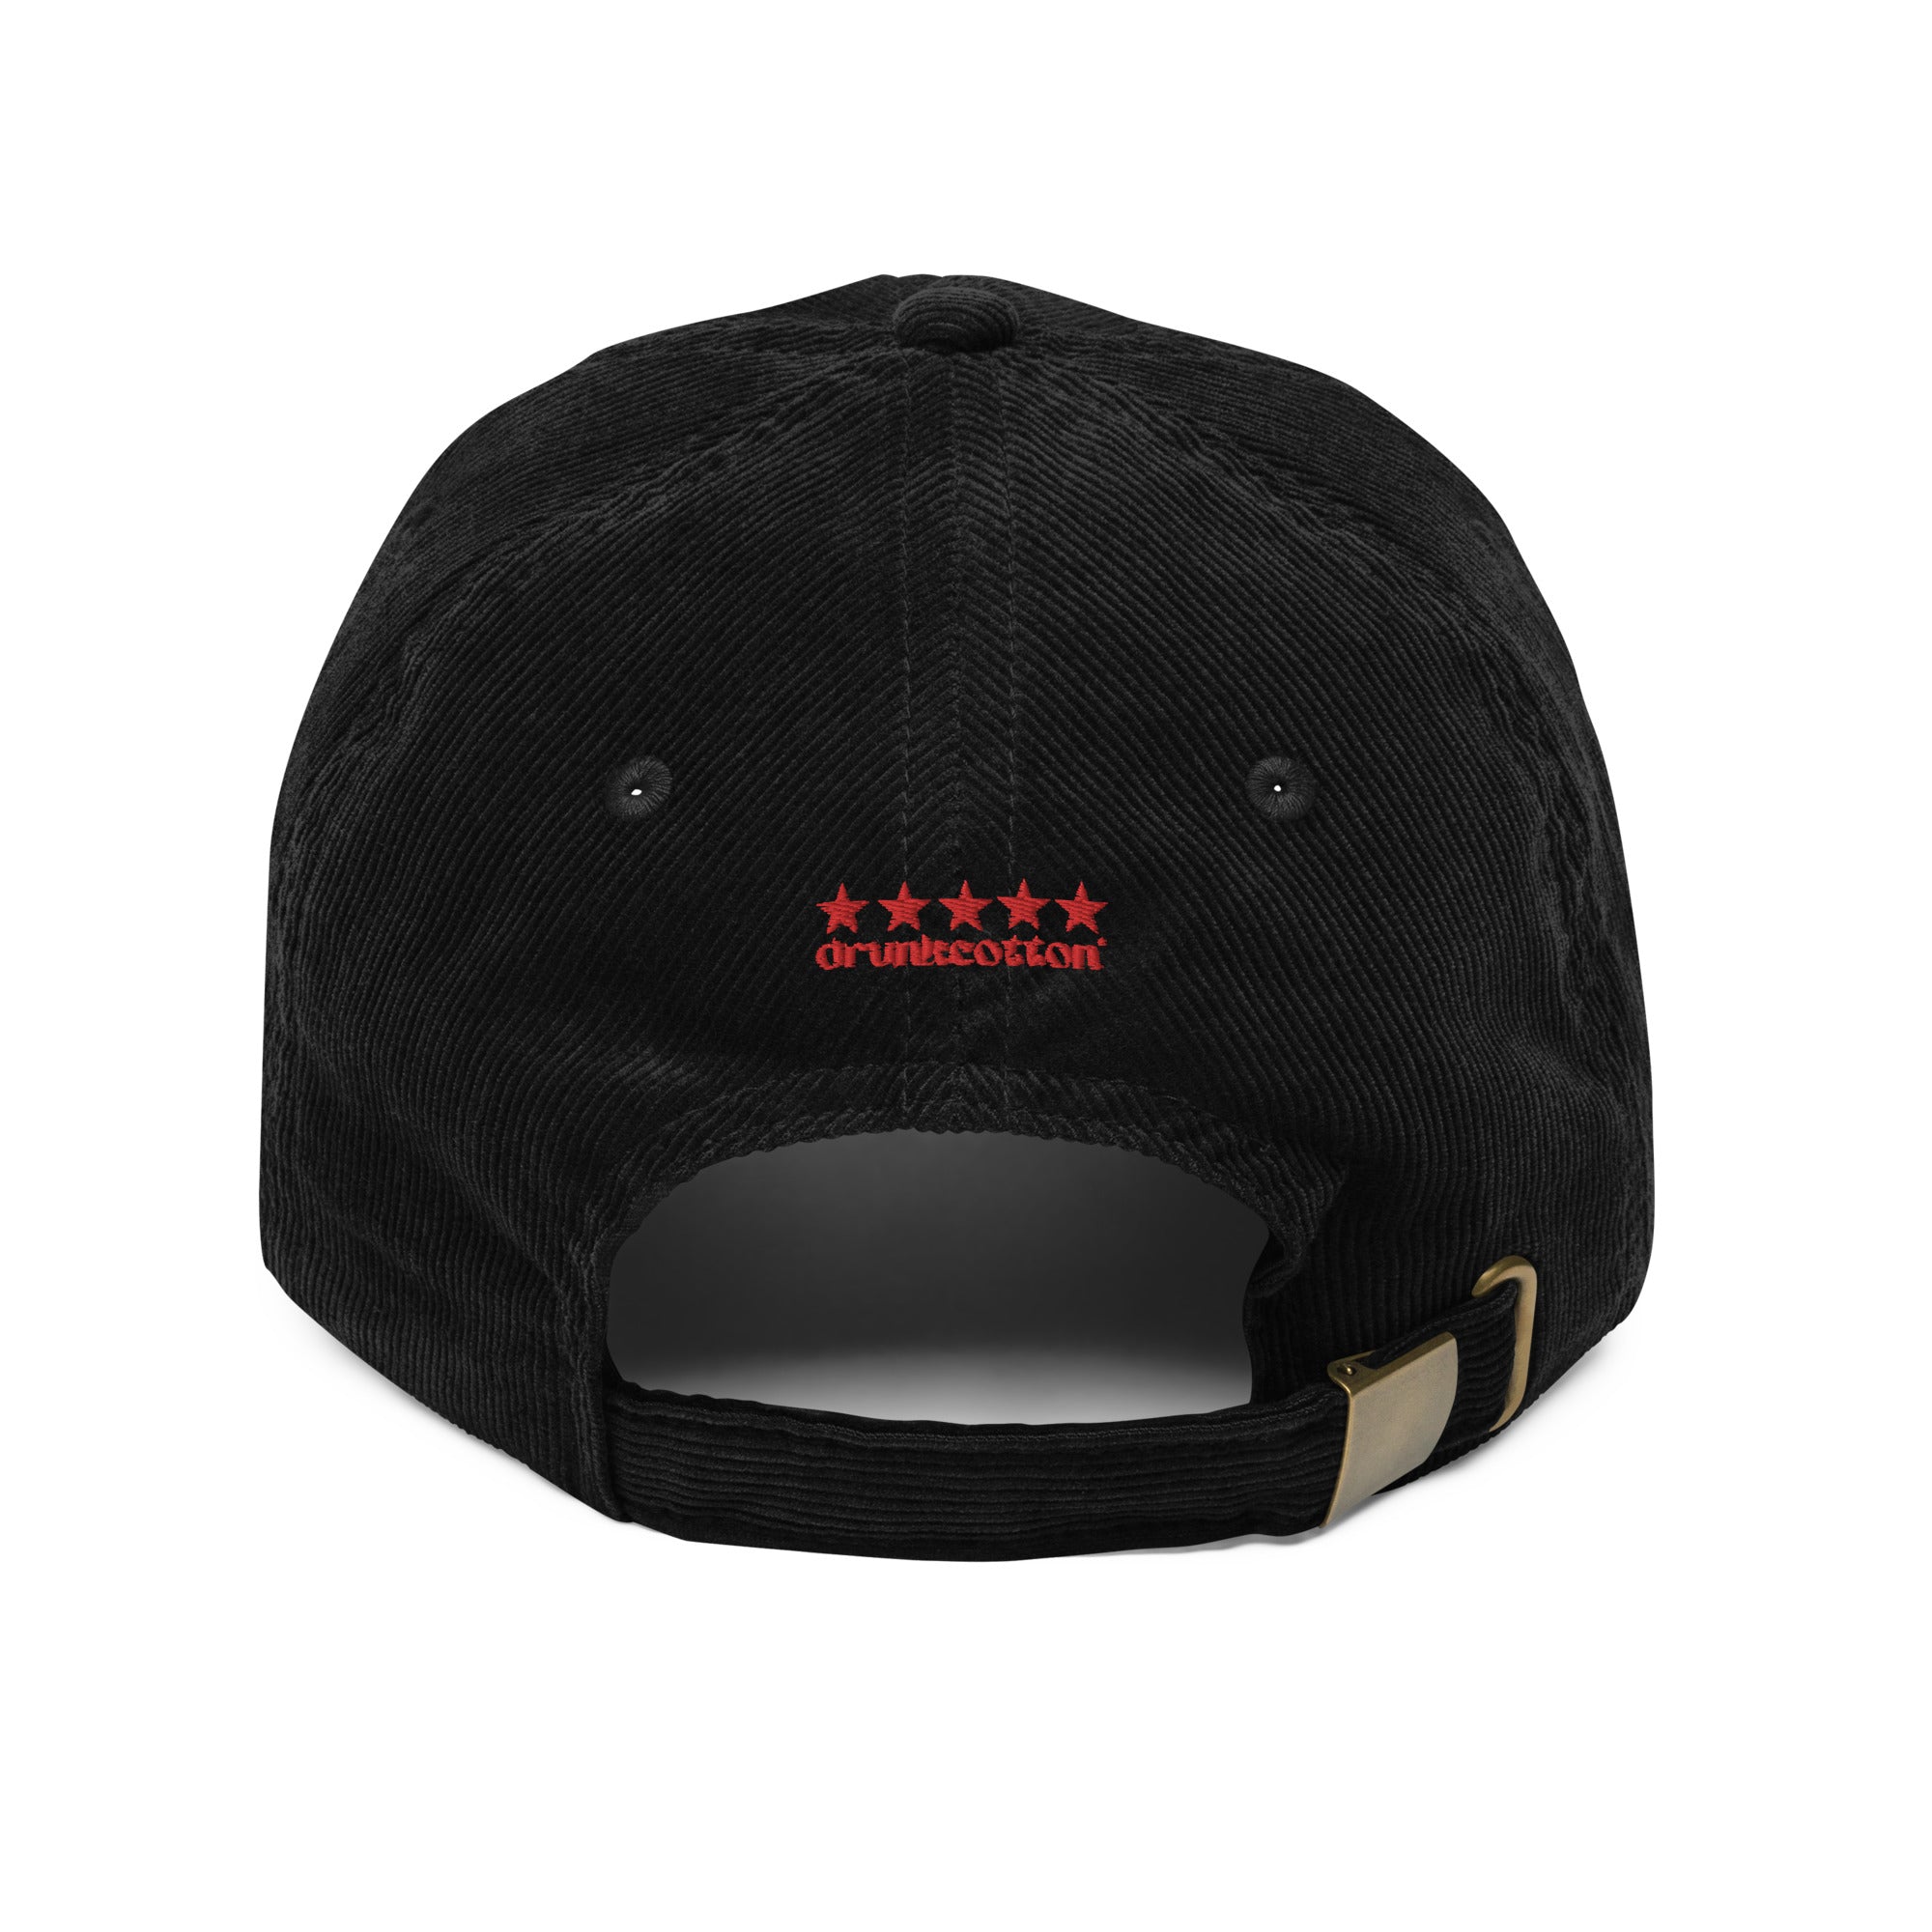 Most Likely Hat